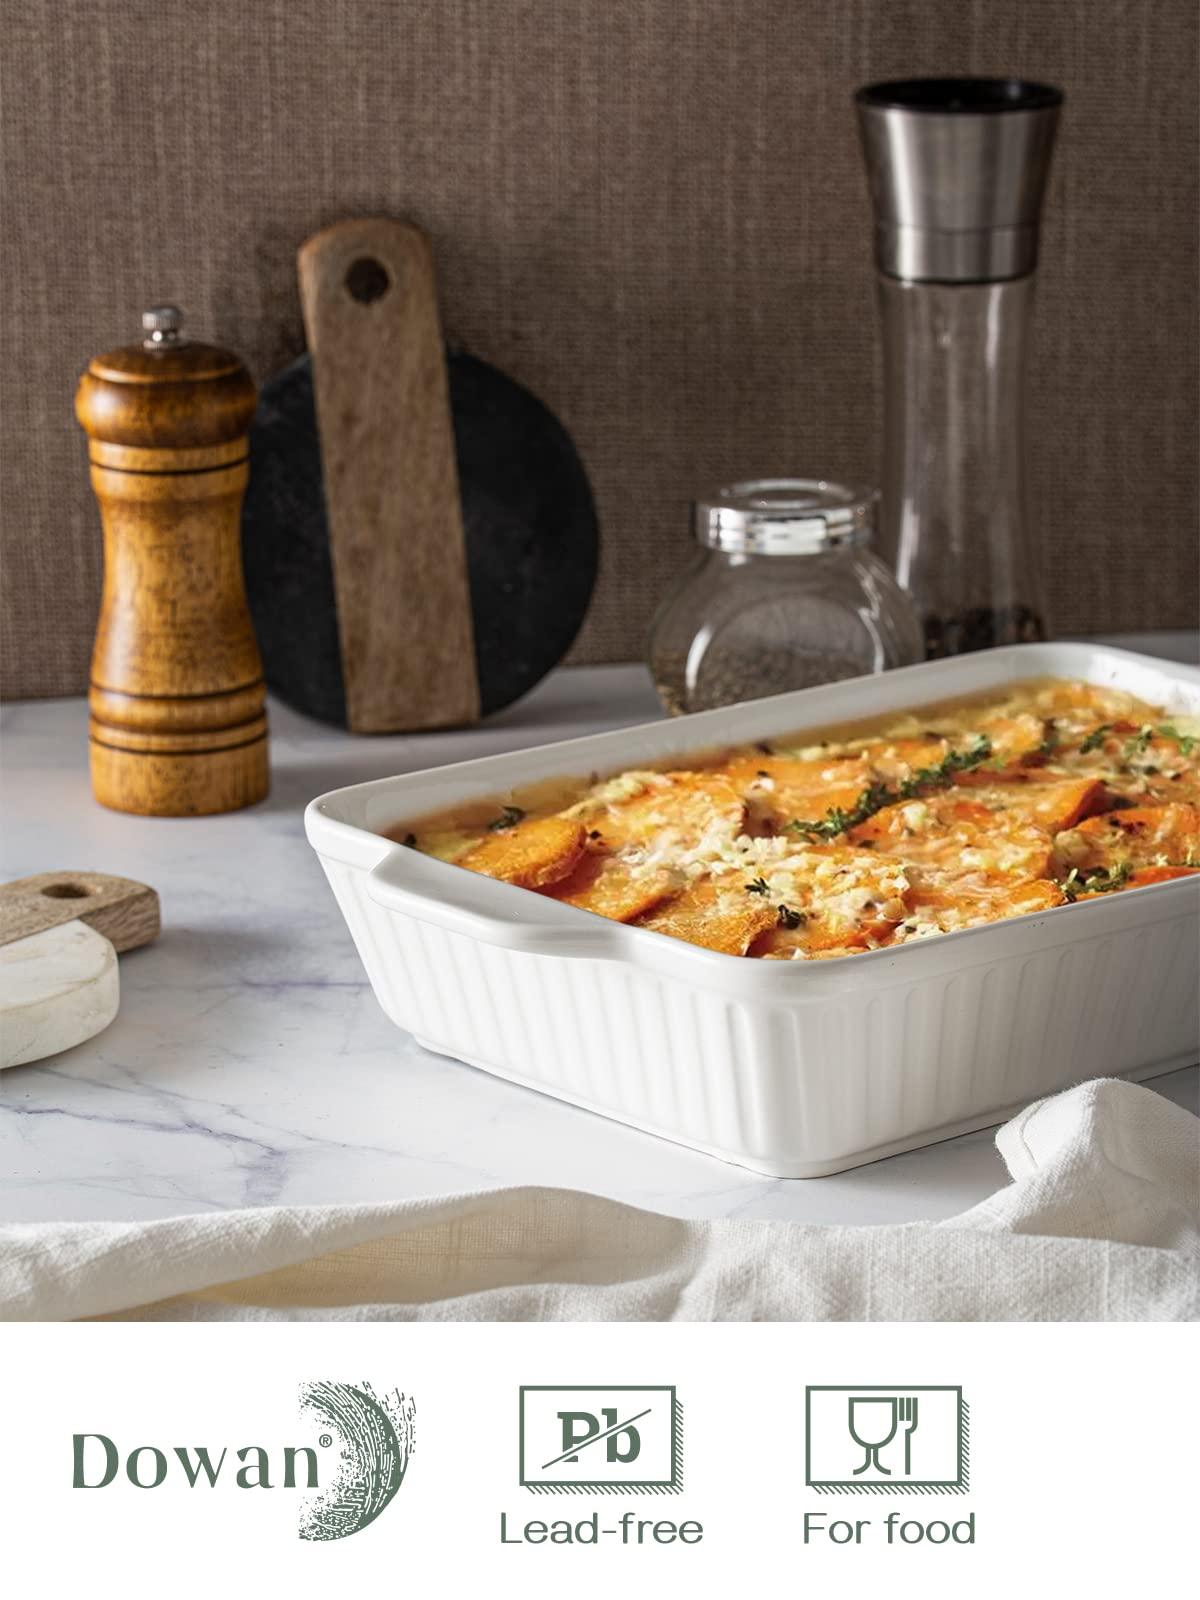 DOWAN Casserole Dishes for Oven, Ceramic Baking Dishes for Oven Set of 3, Lasagna Pan Deep, Baking Pan Set Rectangular Casserole Dish Set with Handles for Baking, White (15.6''/12.2''/8.9'') - CookCave